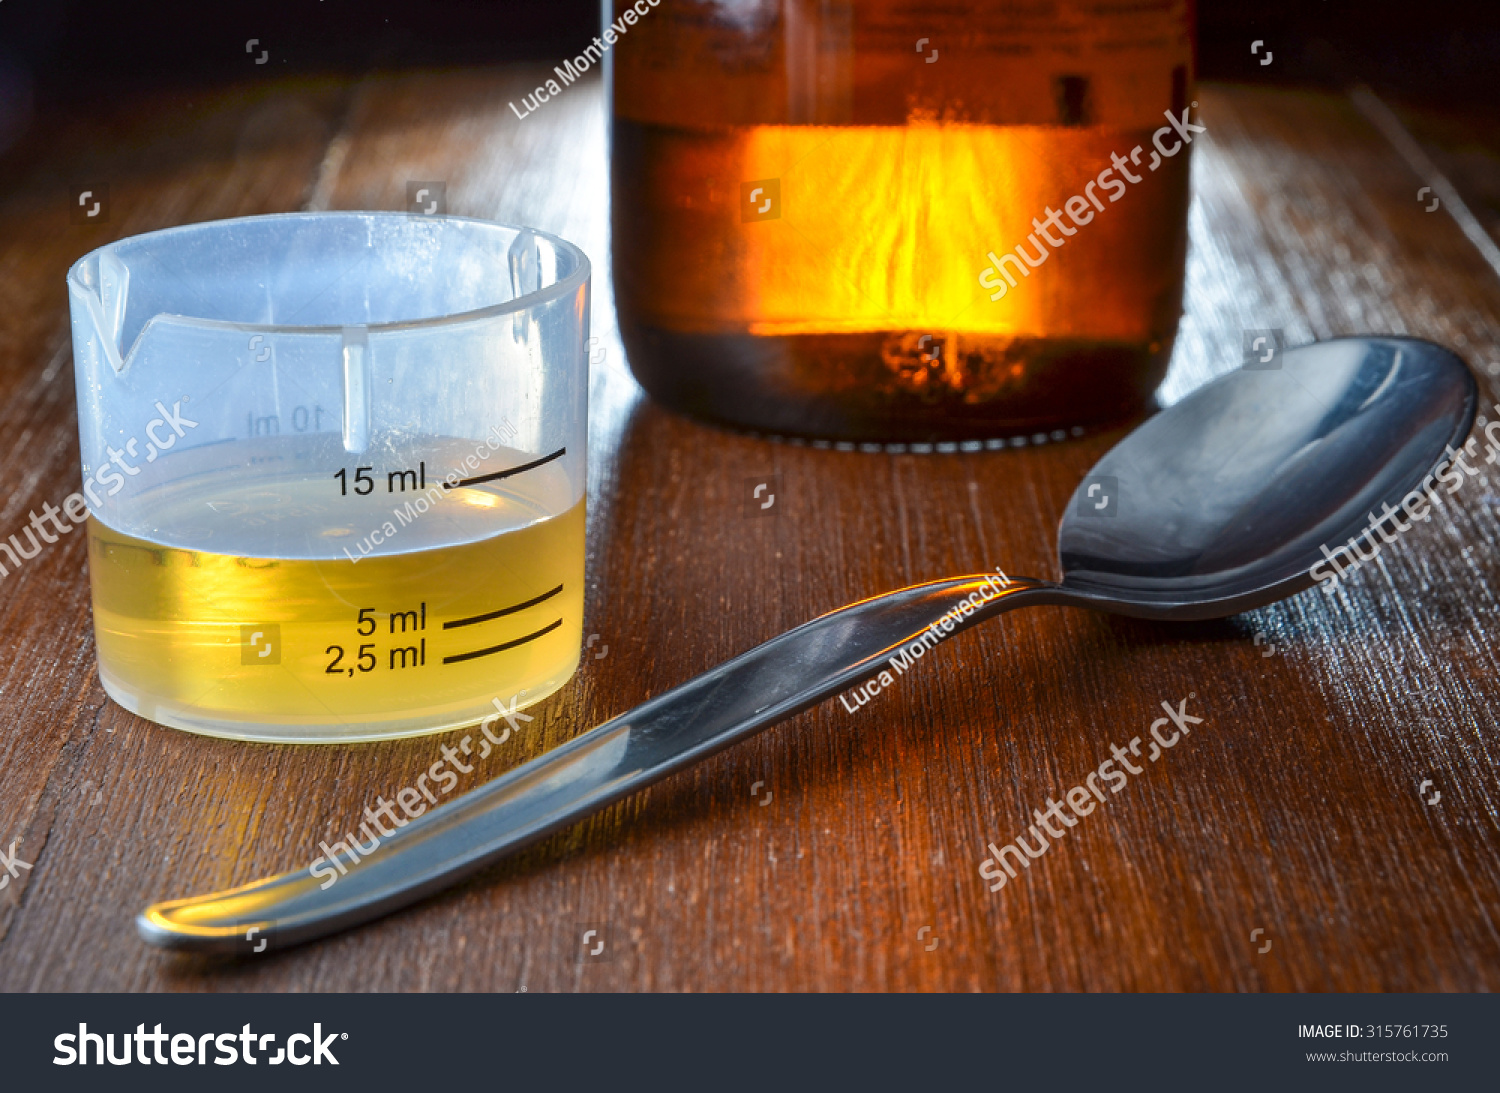 Download Dose Yellow Cough Syrup Measure Cup Healthcare Medical Stock Image 315761735 Yellowimages Mockups